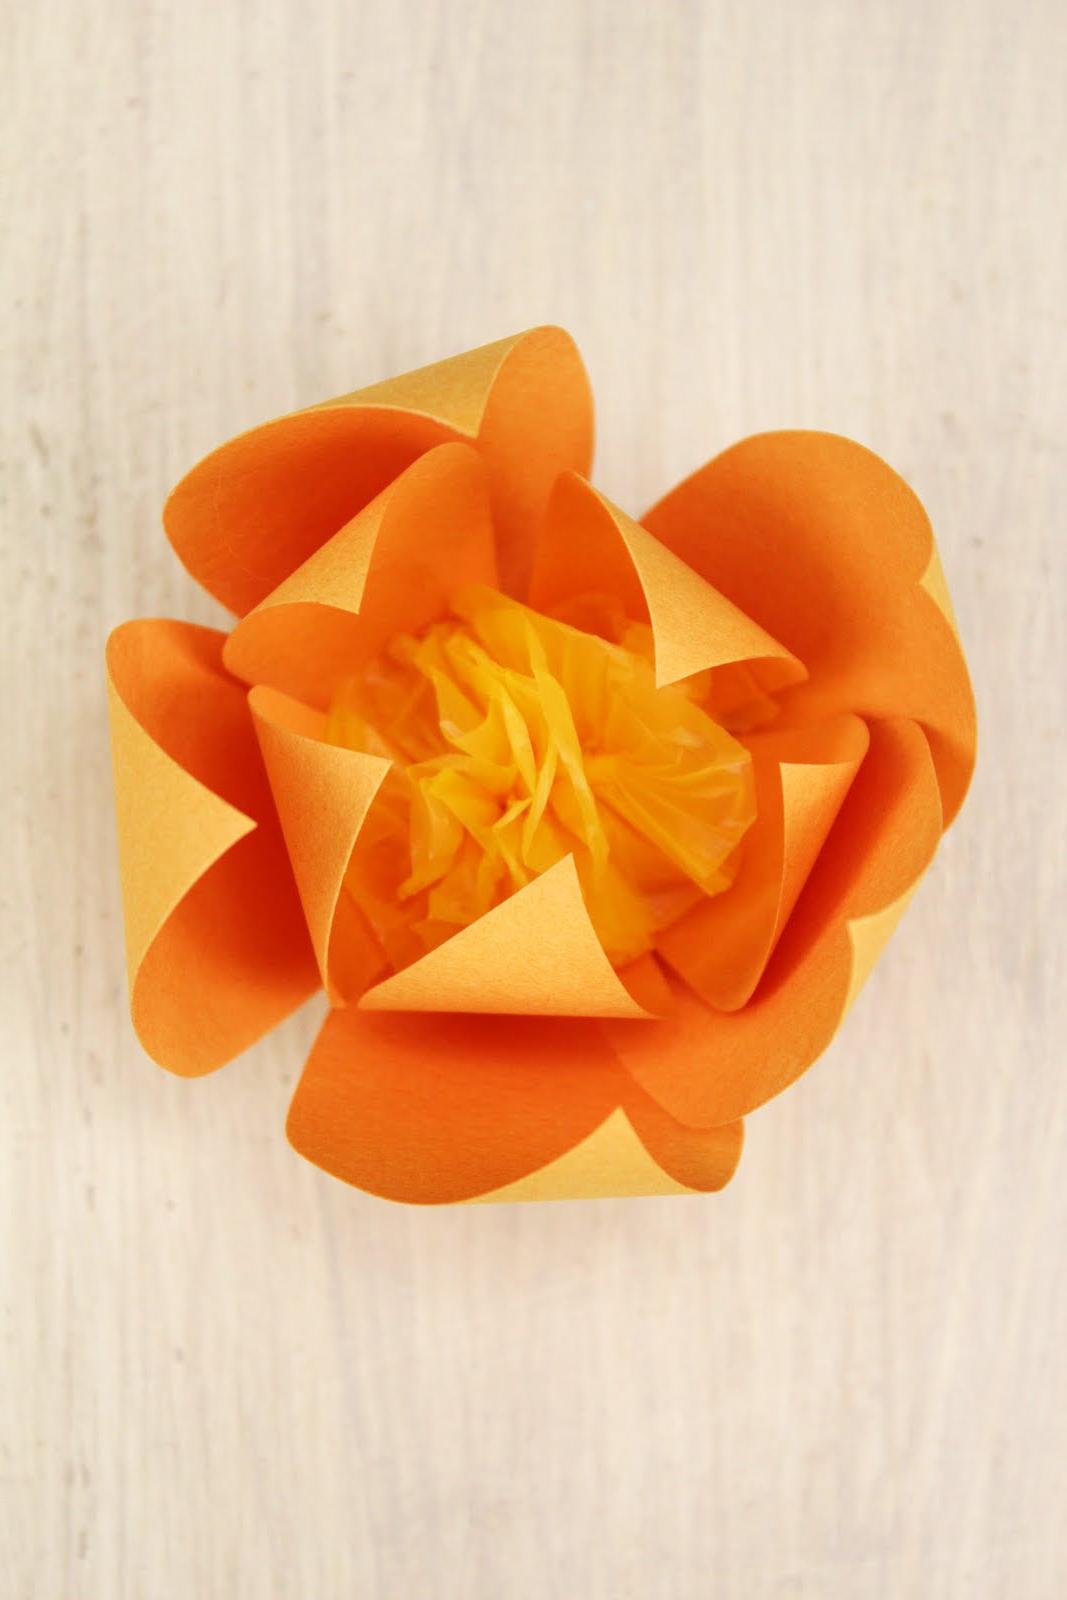 DIY Paper Flowers from Icing